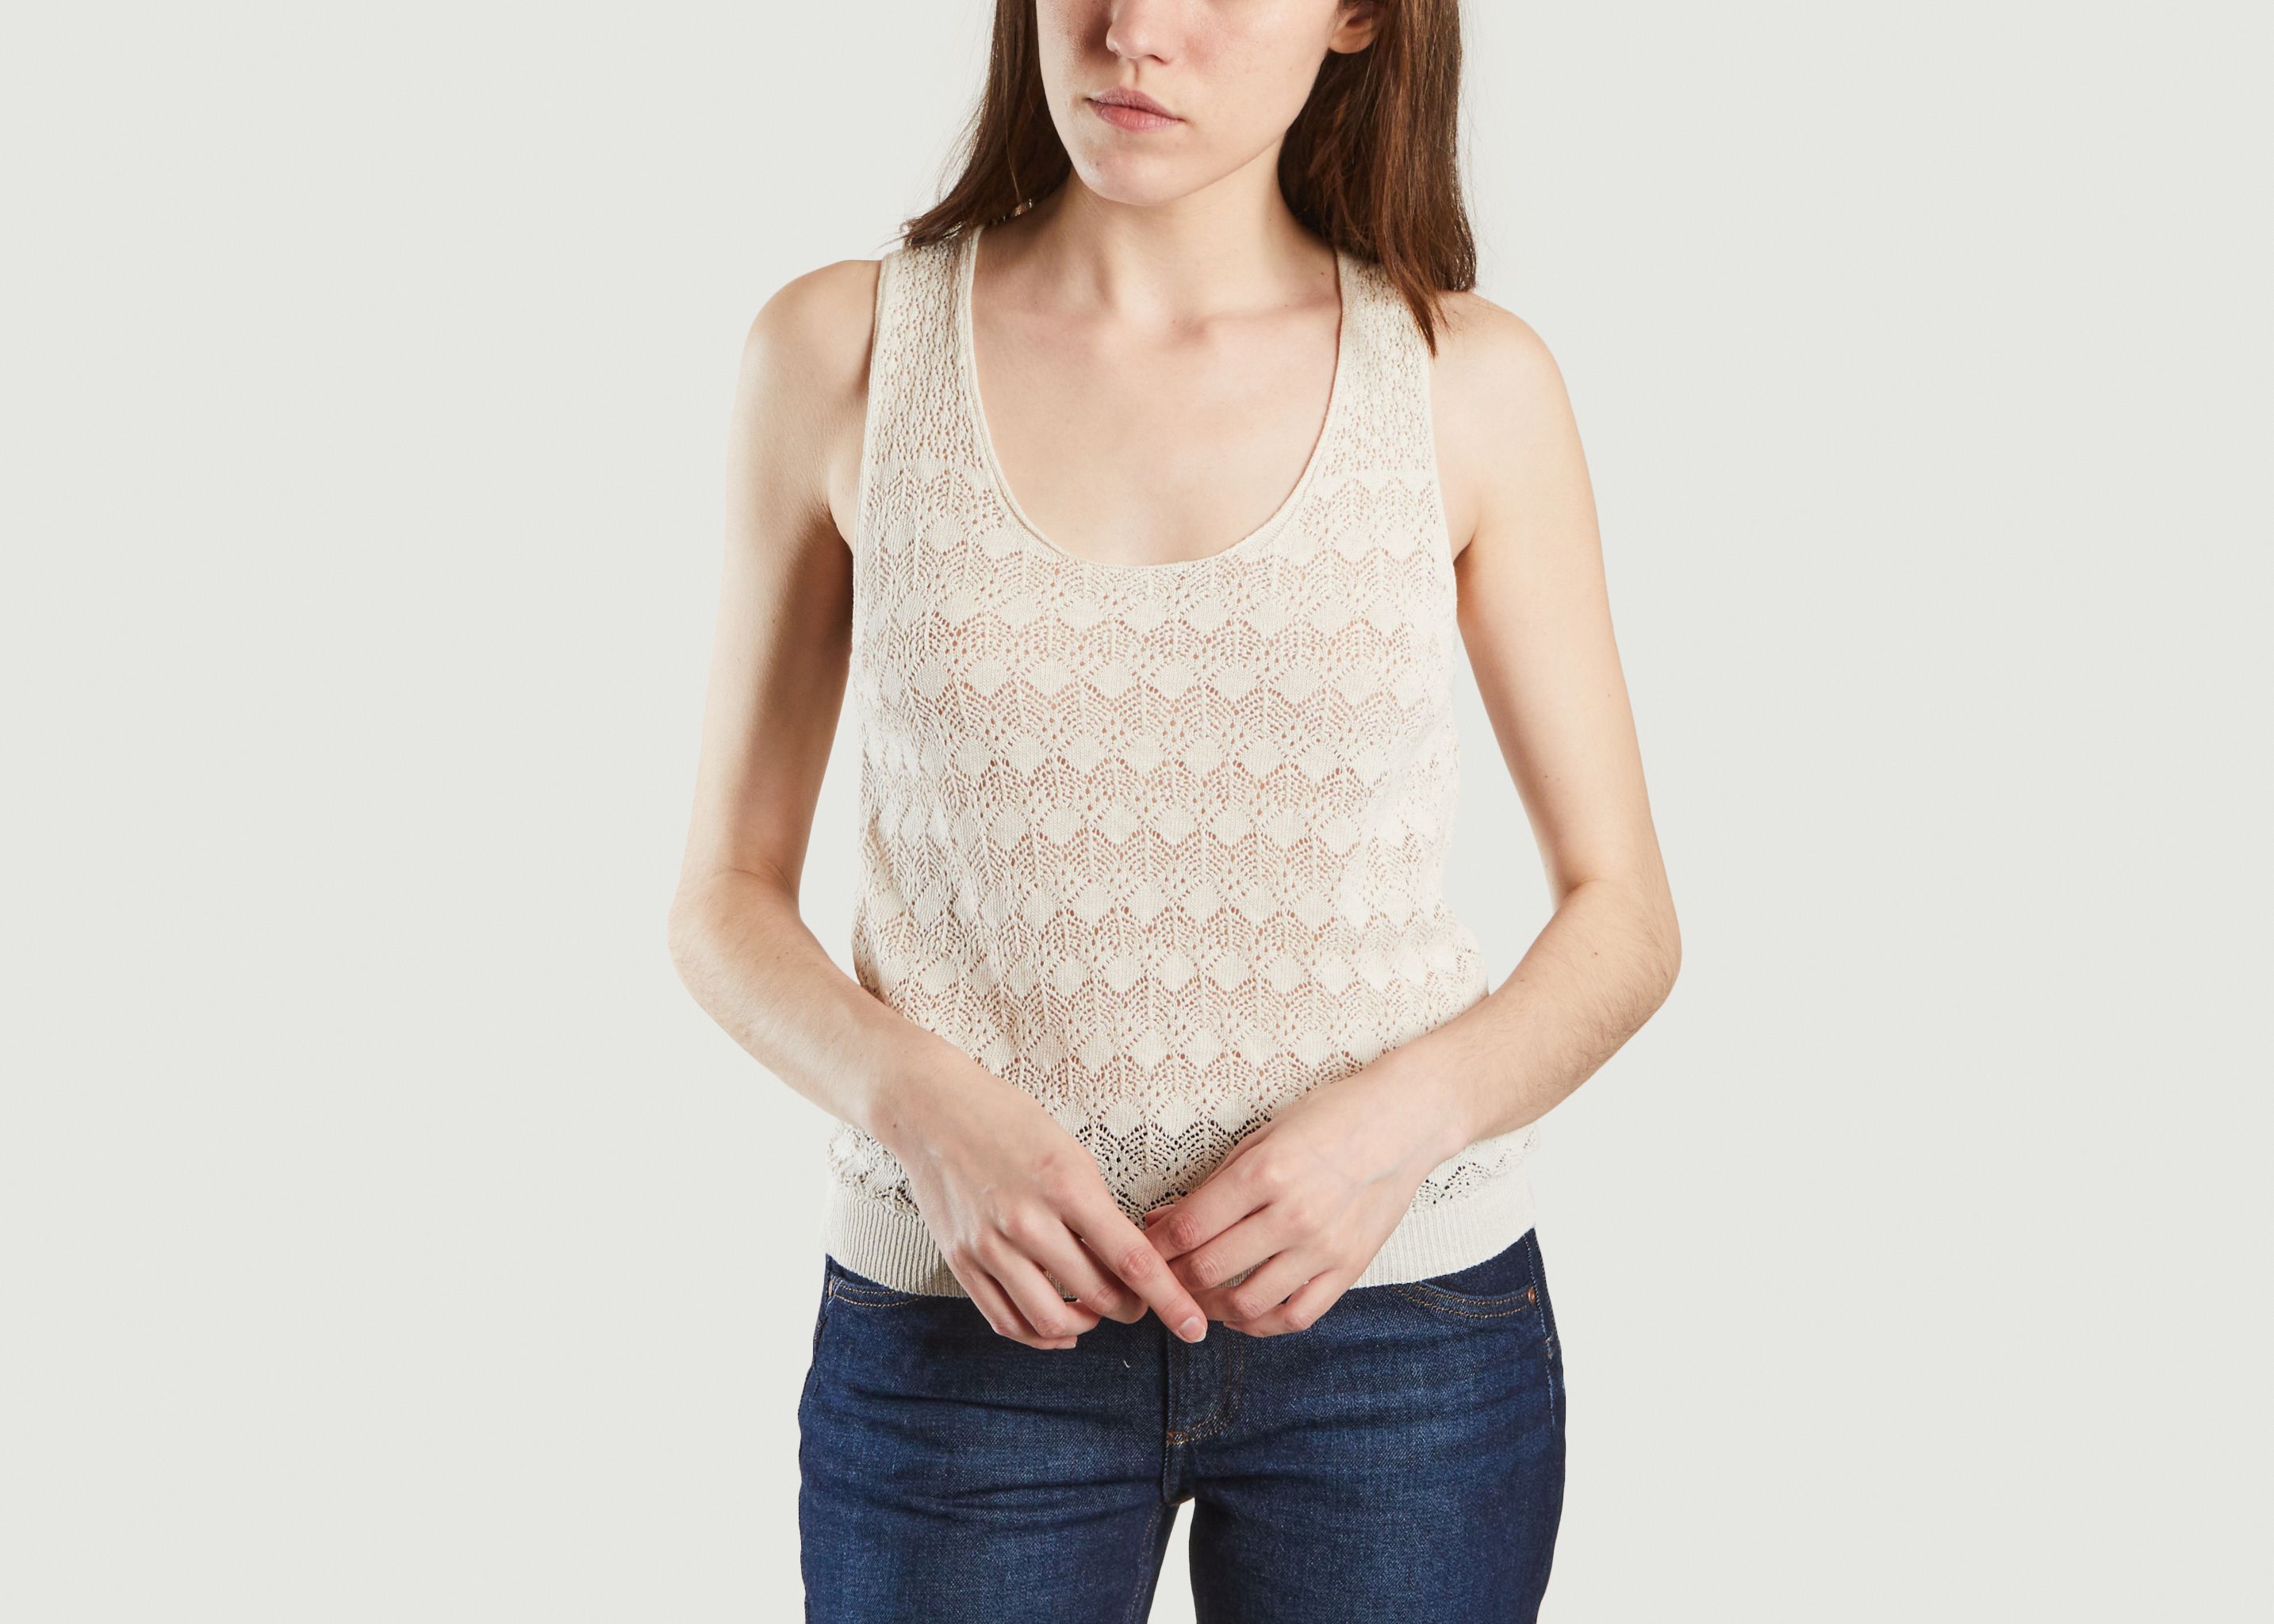 Tym Sel Tank Top Pullover - Tinsels